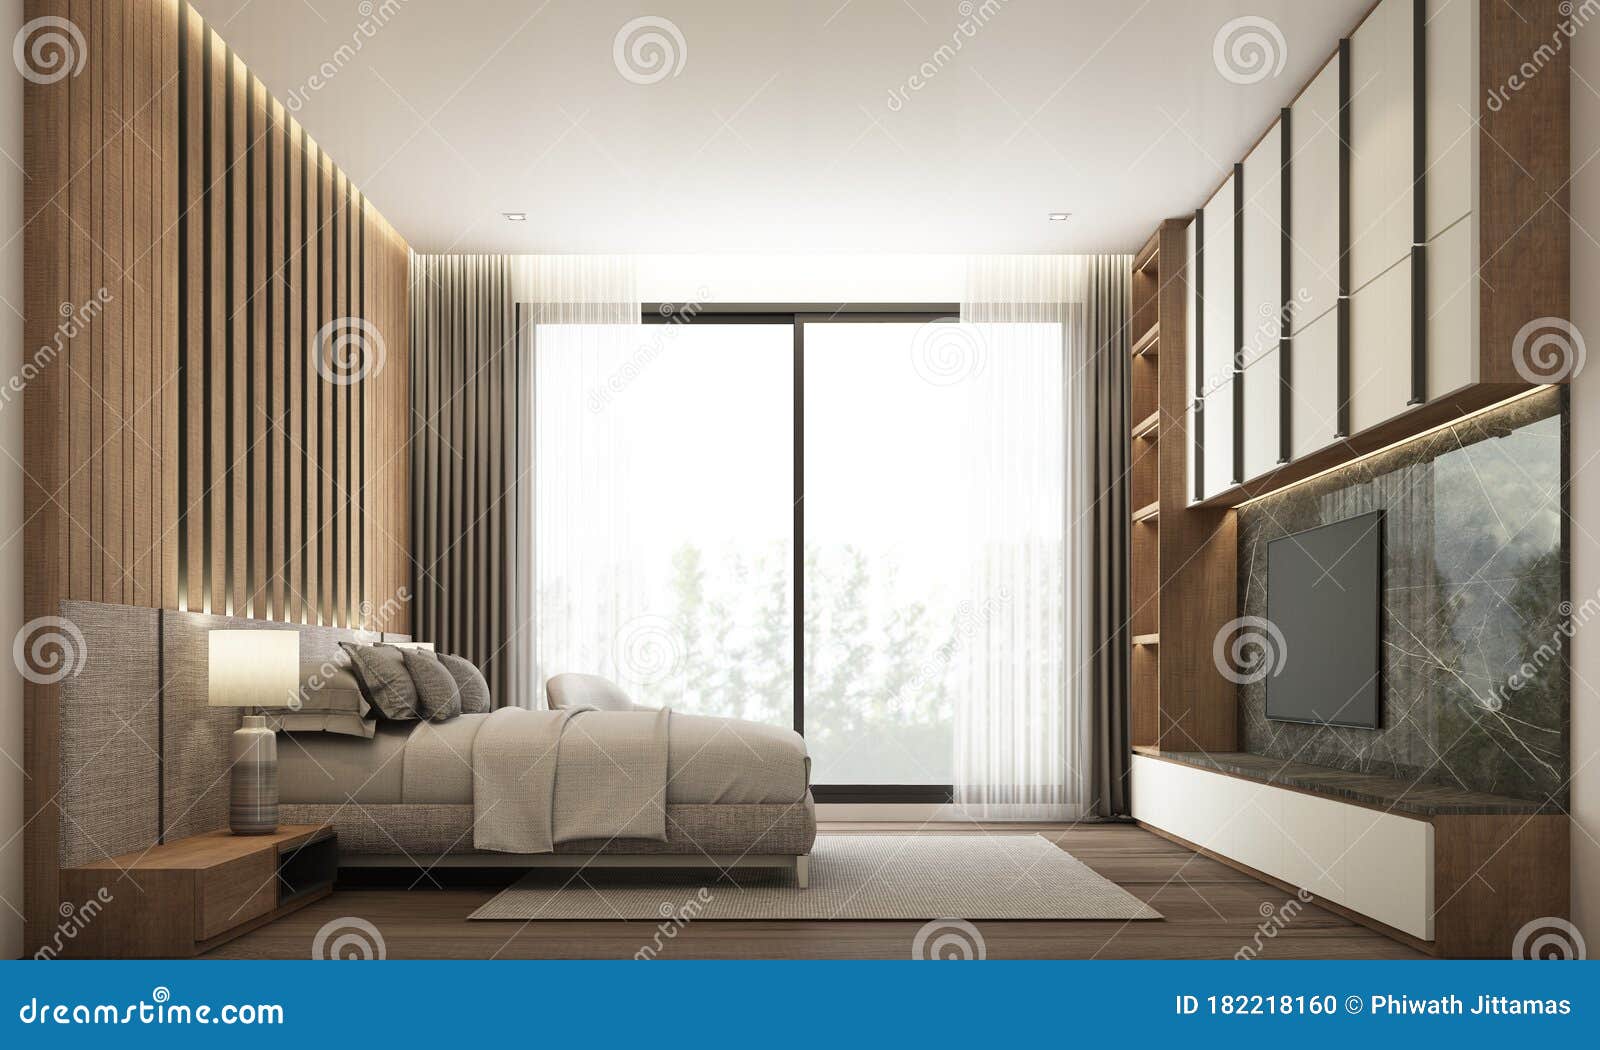 Bedroom Modern Minimal Style With Built-In Headboard And Tv Cabinet Stock  Illustration - Illustration Of Window, Indoor: 182218160